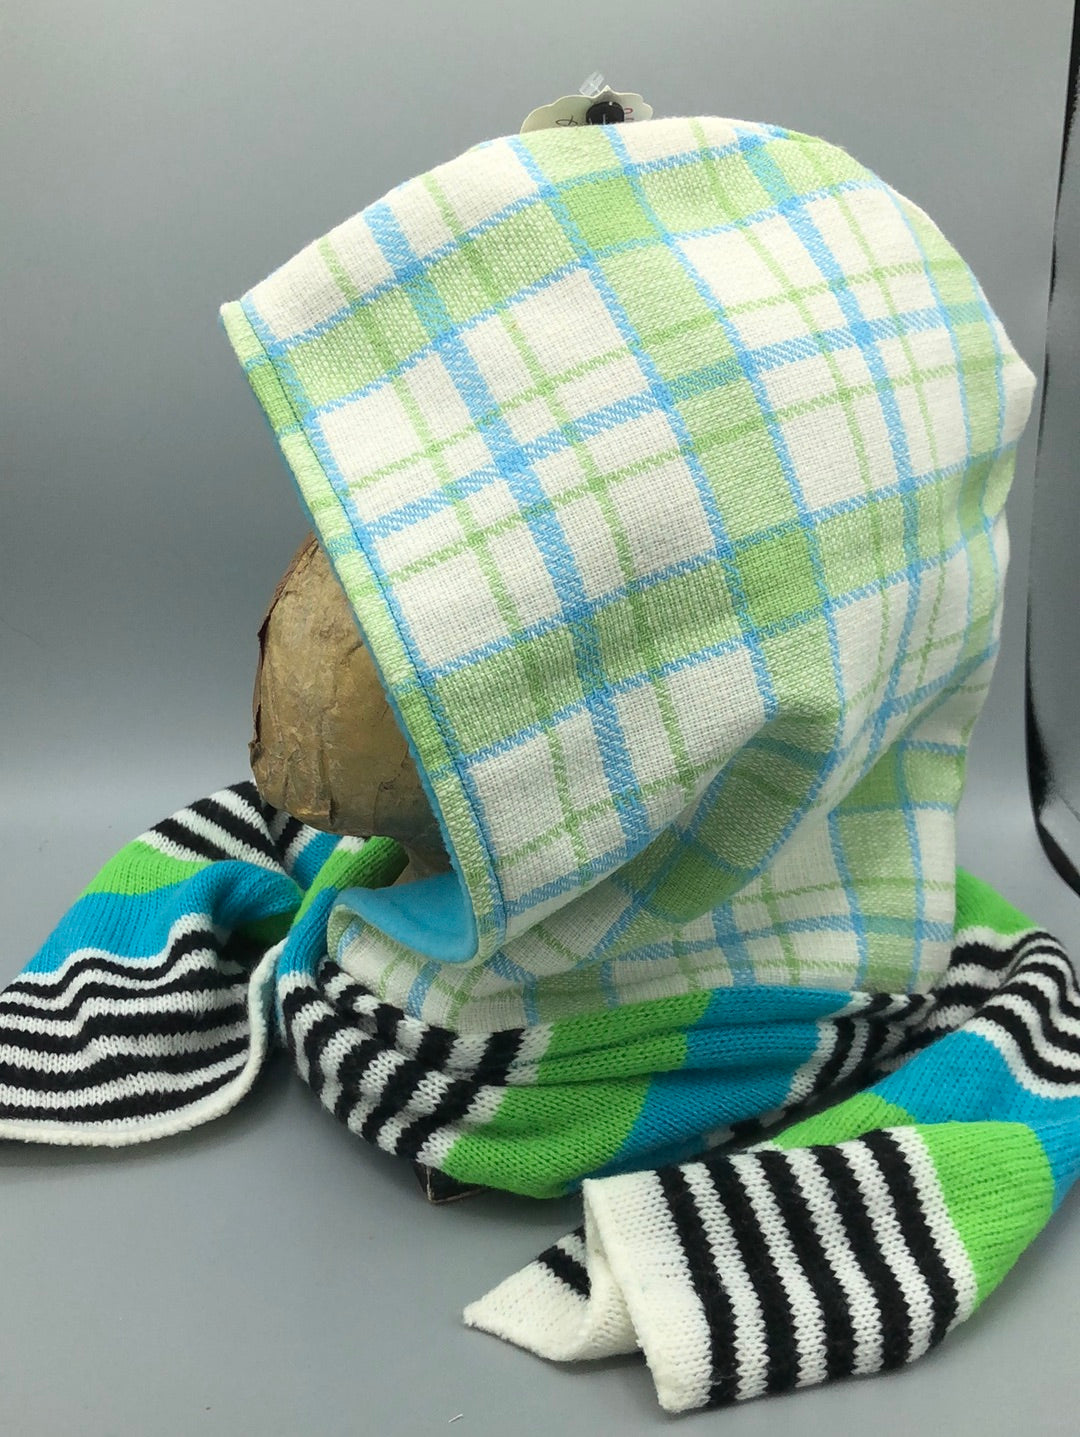 Green and White Plaid Hoodie Scarf with Blue Lining and colorful striped scarf with cat and dog patches